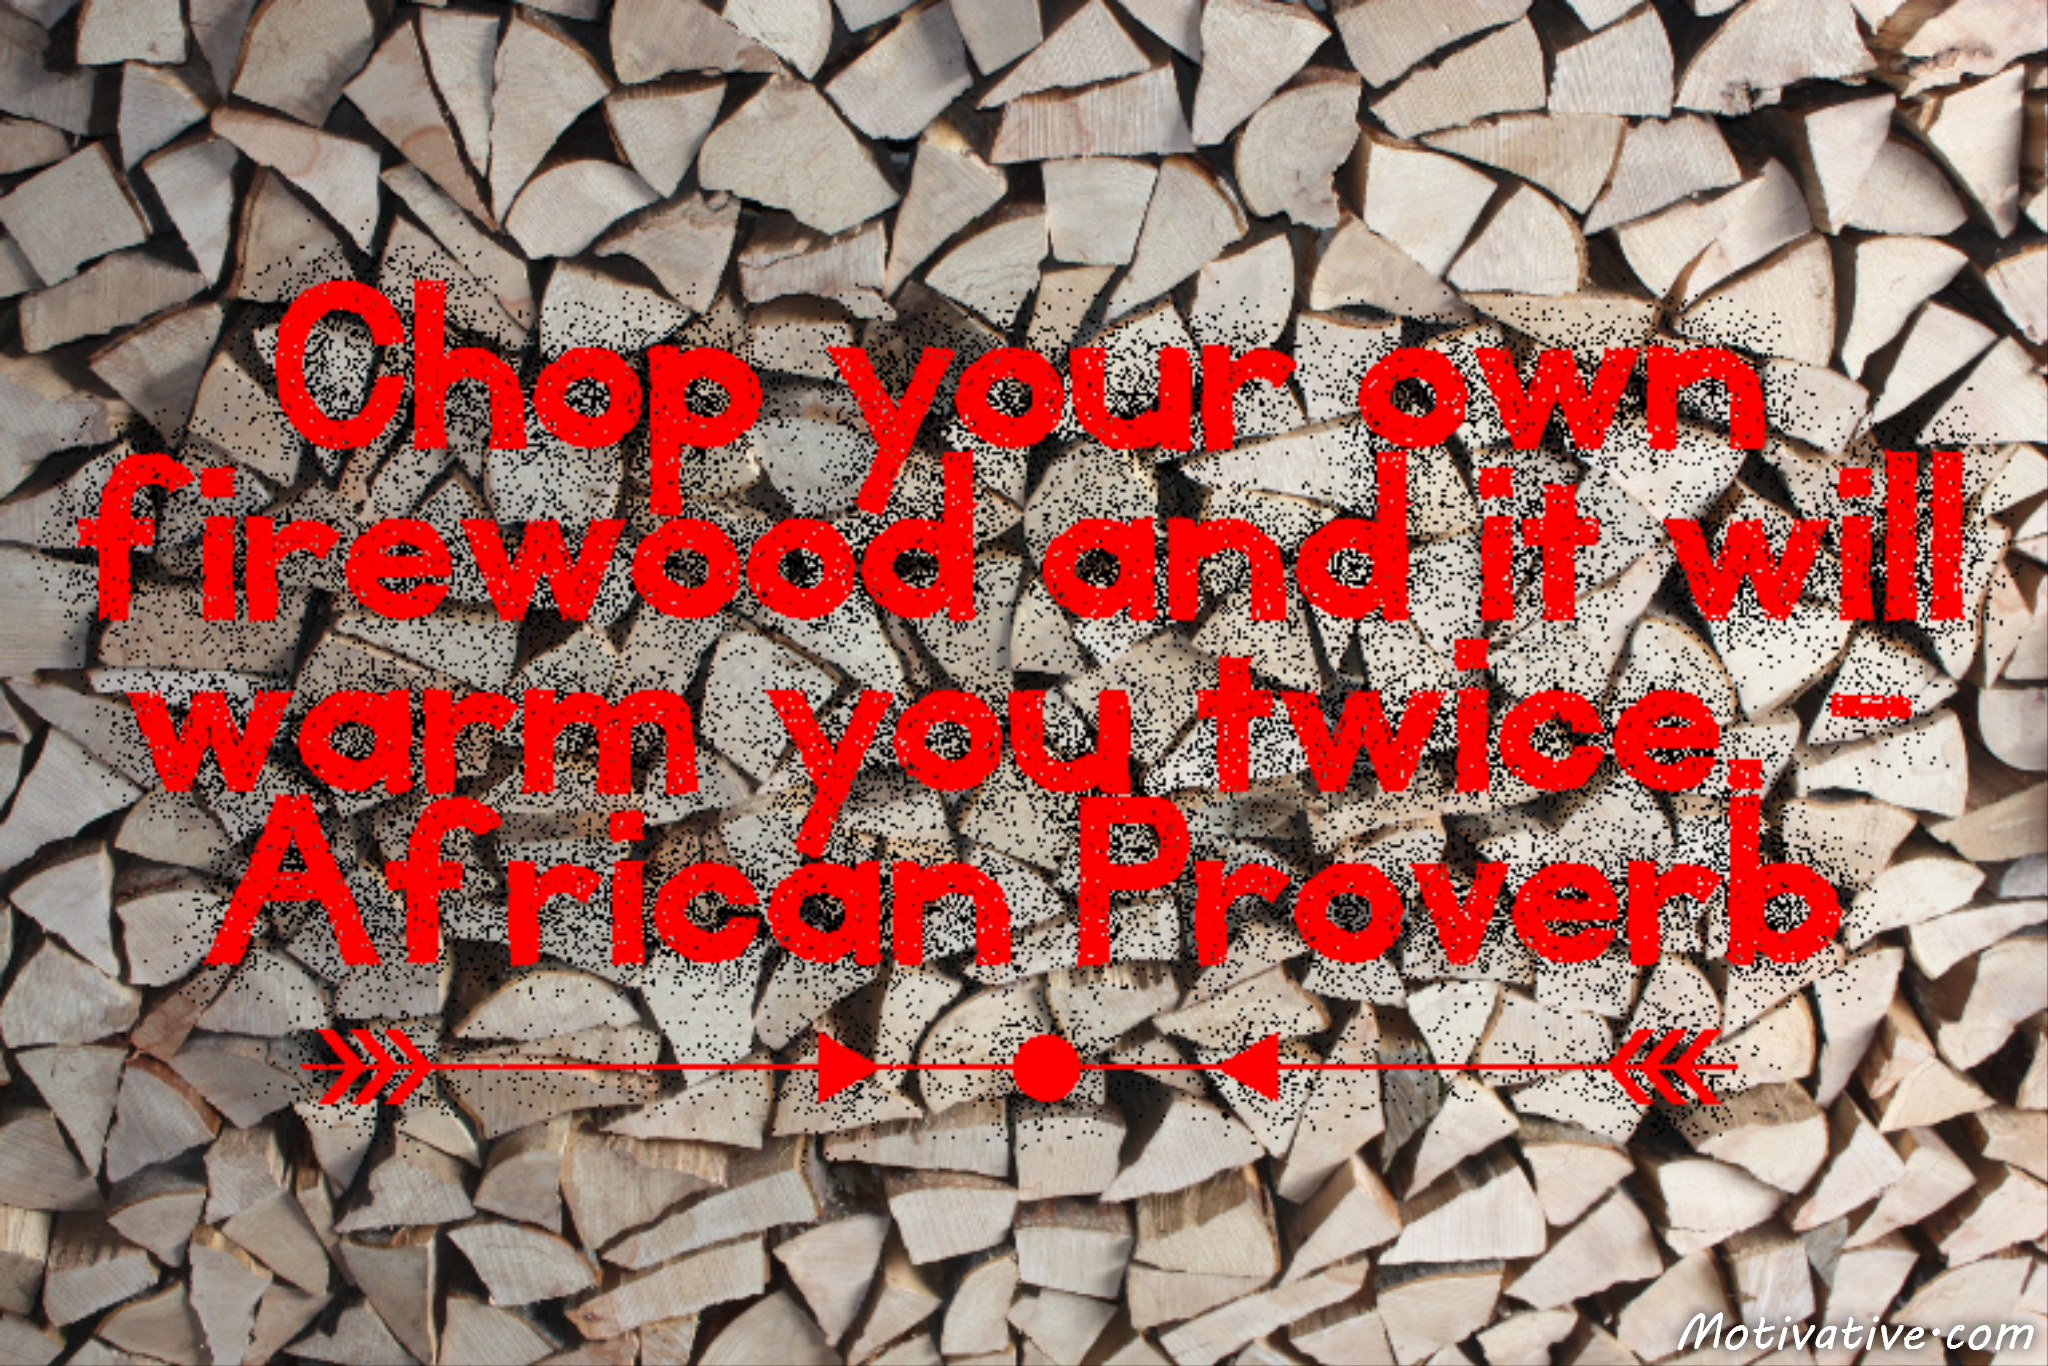 Chop your own firewood and it will warm you twice. – African Proverb